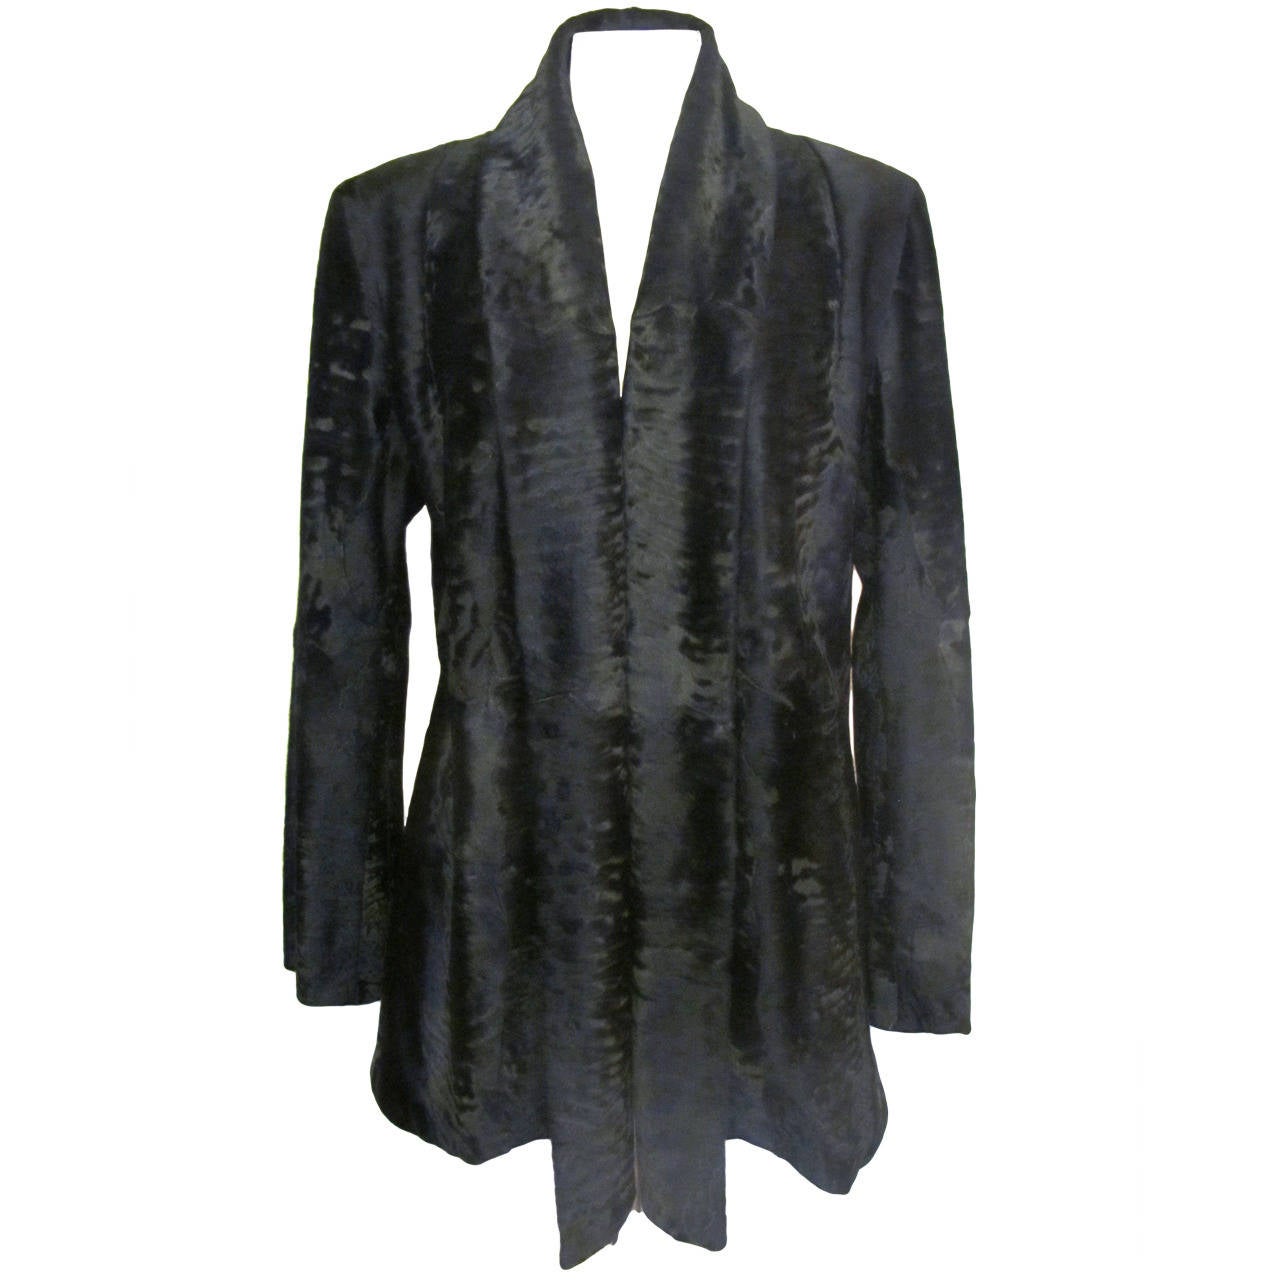 Giuliana Teso Black Broadtail Jacket for Neiman Marcus For Sale